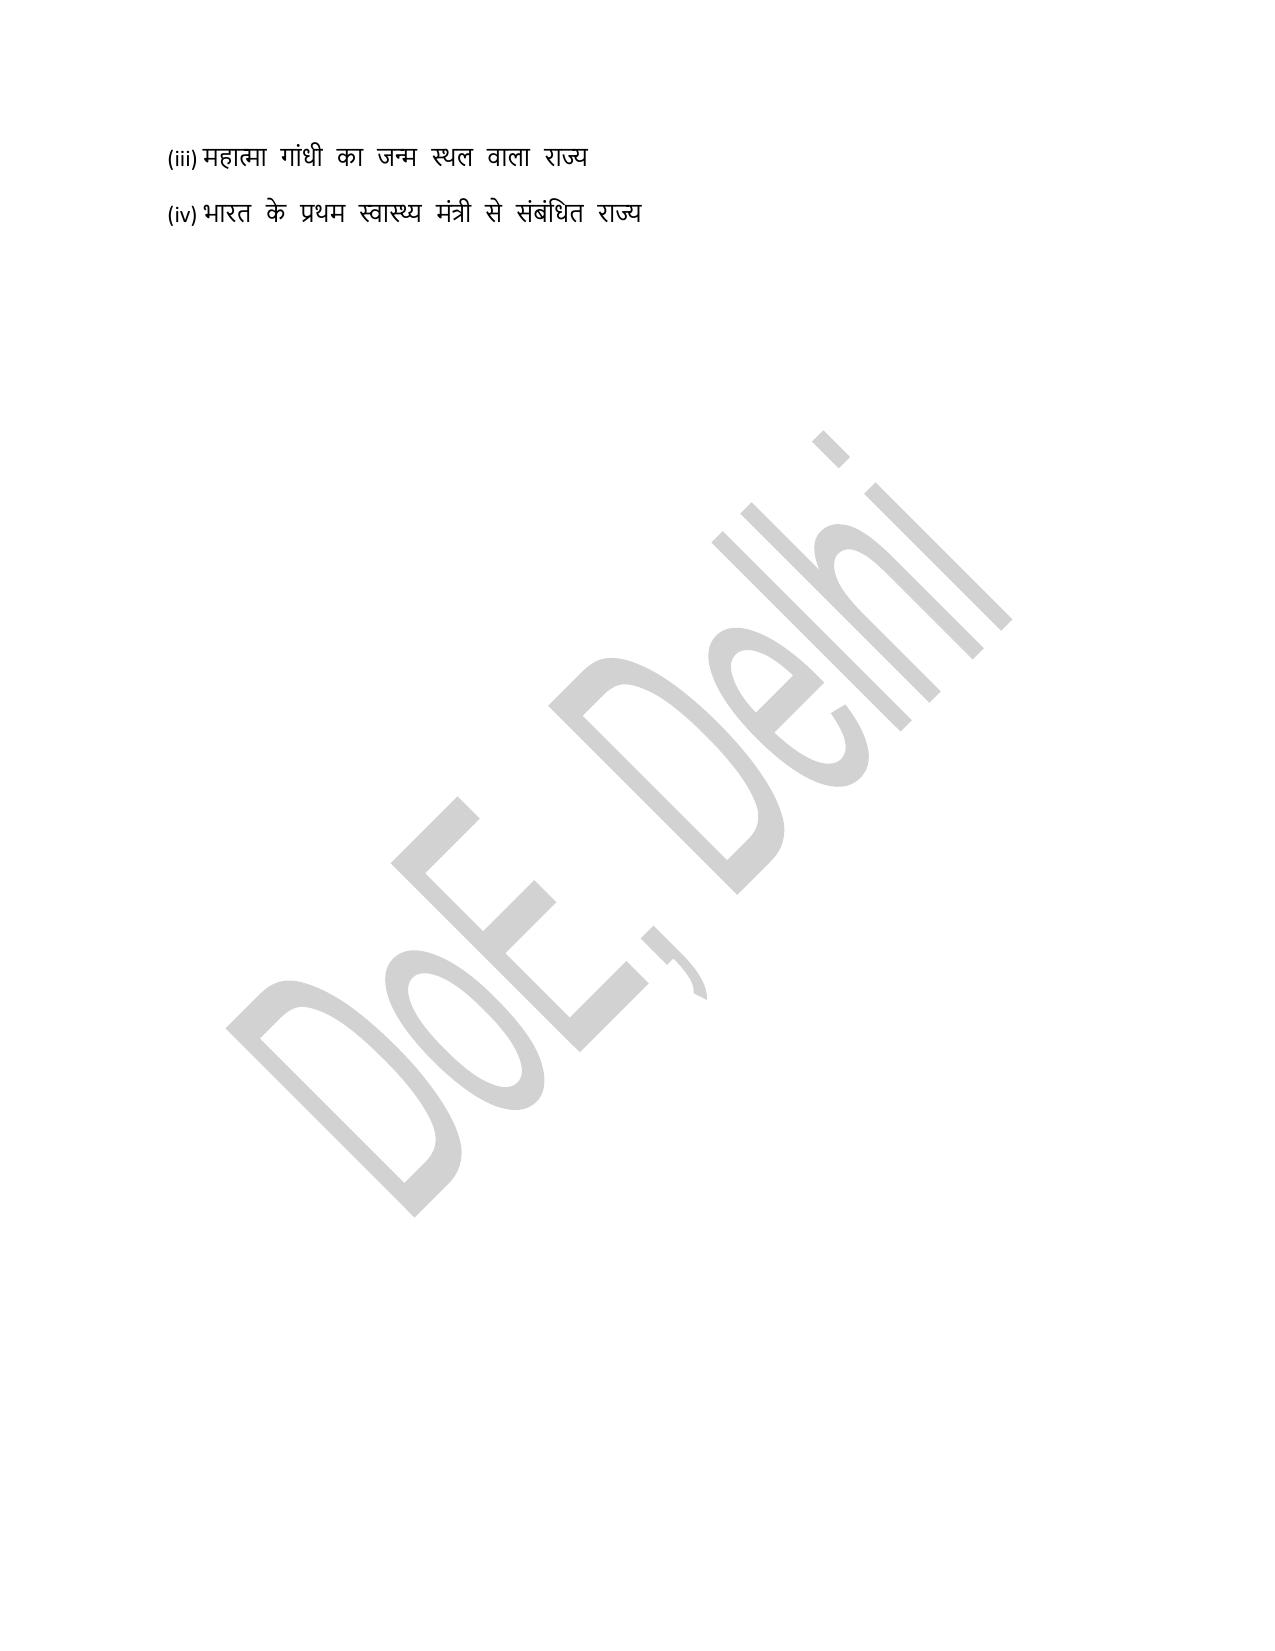 Edudel Class 12 Political Science (Hindi) Practice Papers-2 (2023-24) - Page 8